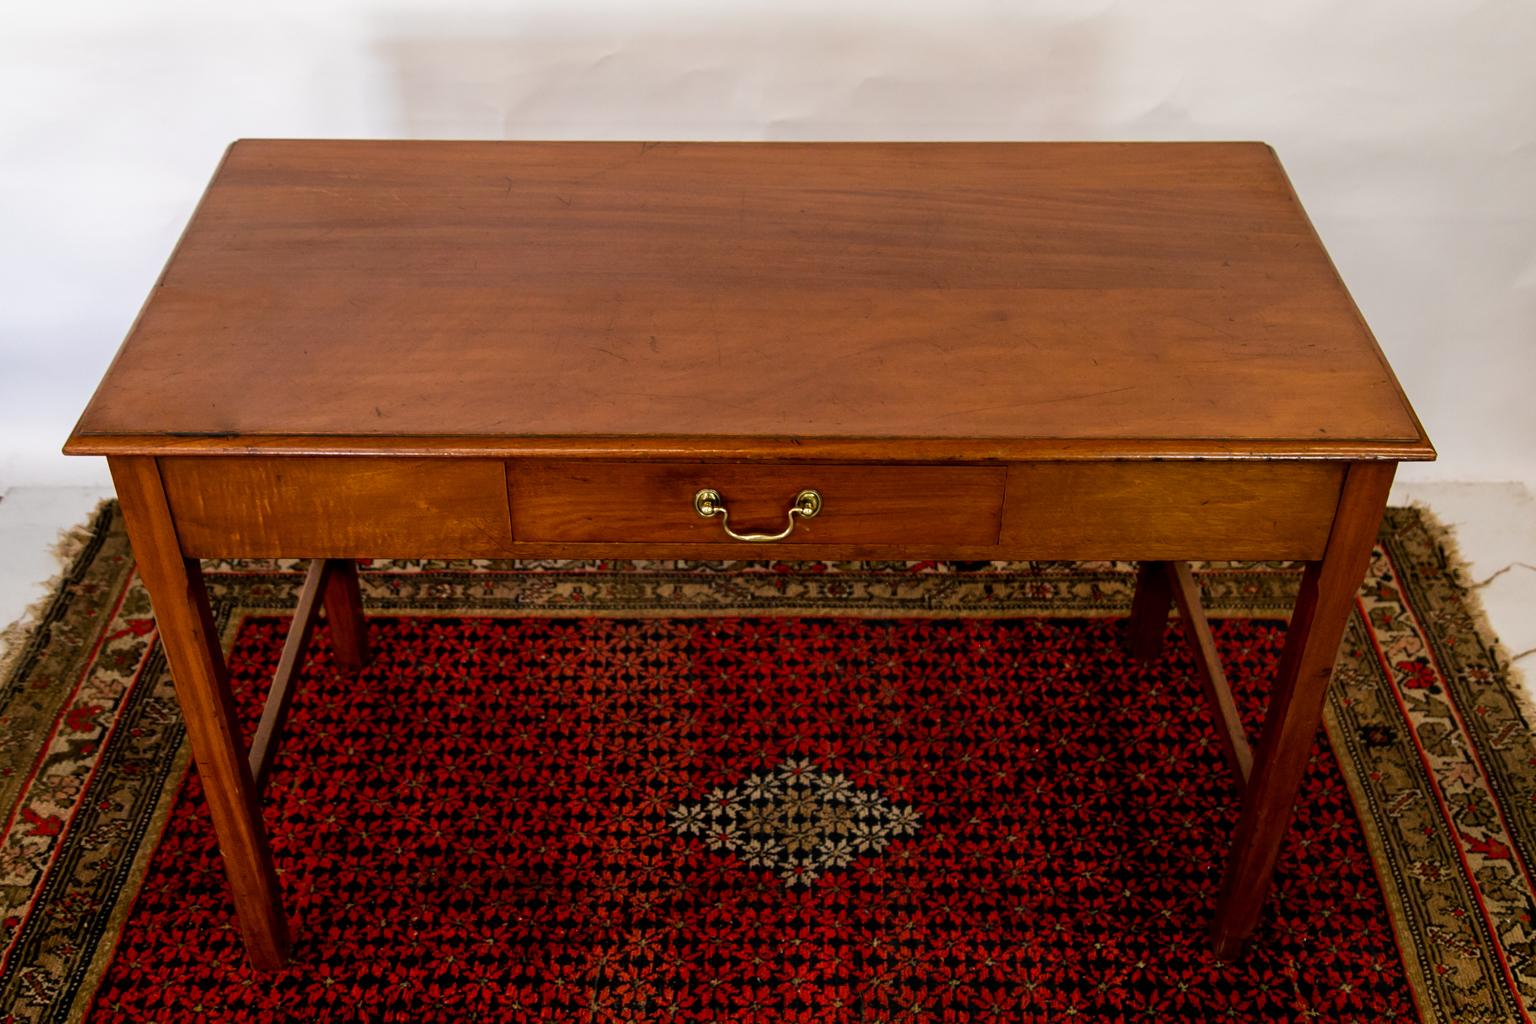 This table is solid mahogany. The top has a bullnosed edge. The four legs have pencil post chamfers on all four sides and are joined by a stretcher on the sides and back.